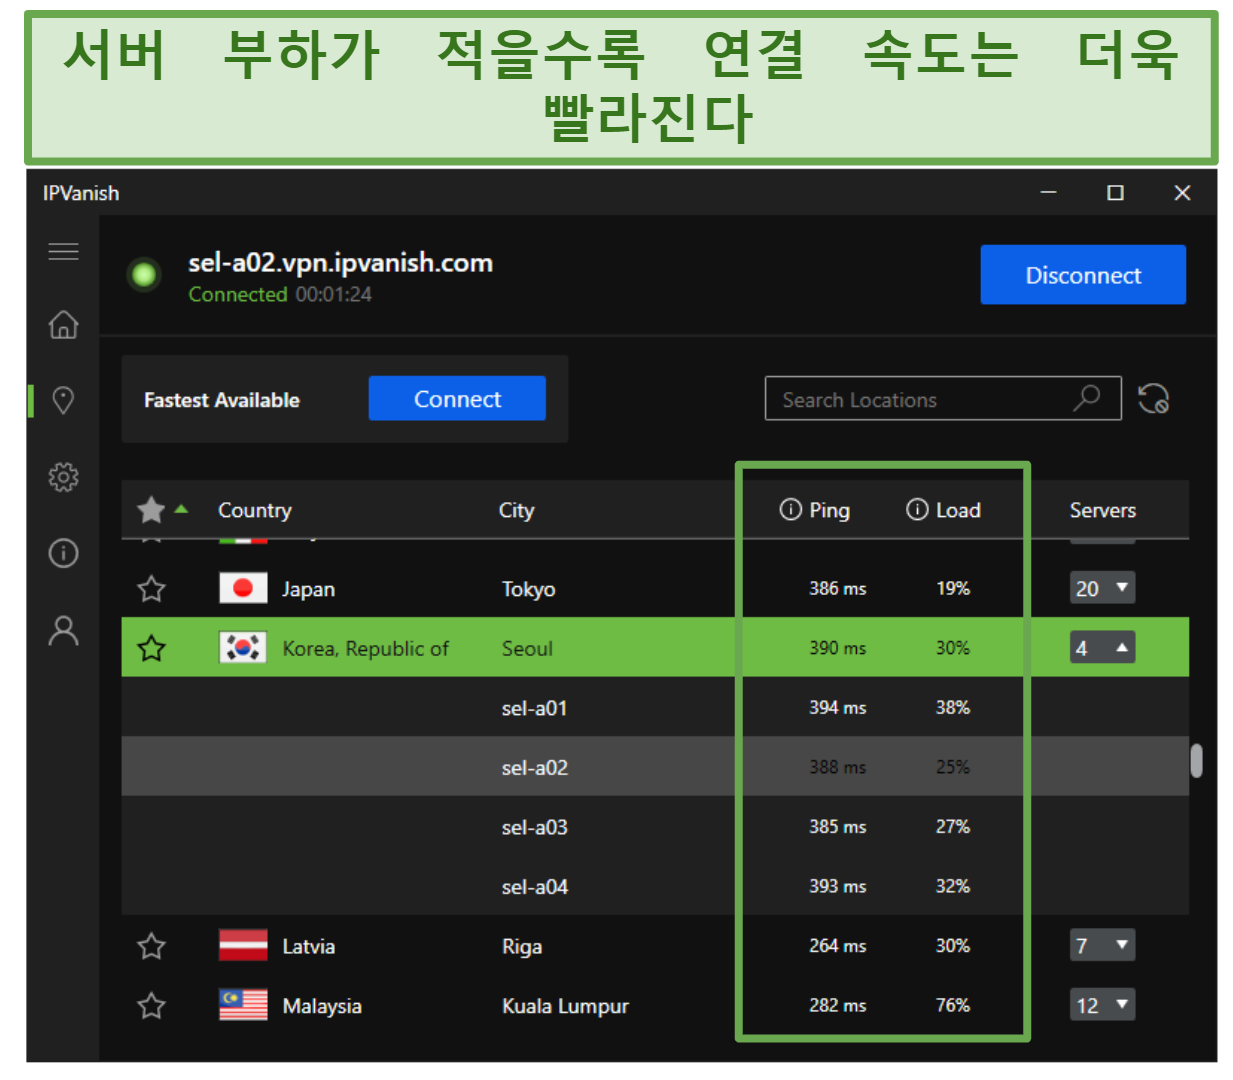 Screenshot of the IPVanish interface showing its South Korean servers and their ping and load